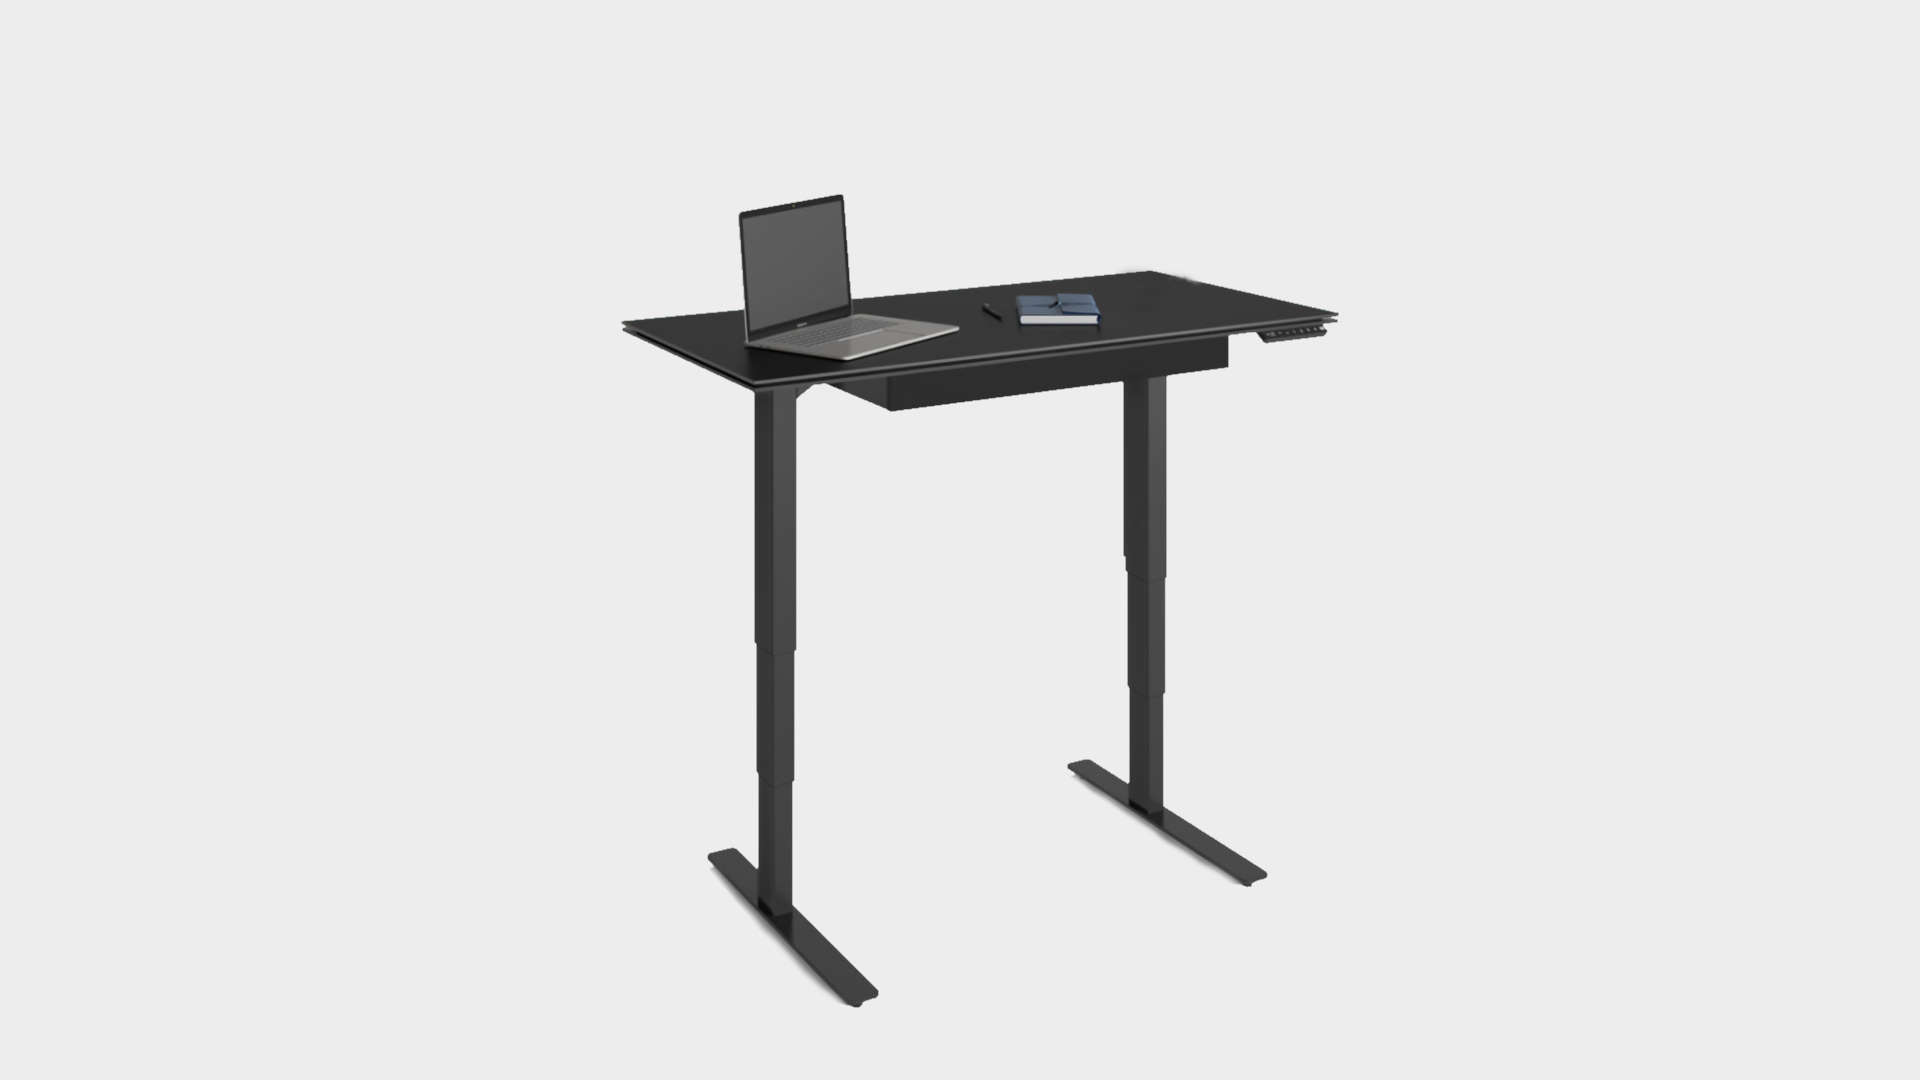 BDI Stance luxury desk in standing mode from the front at an angle